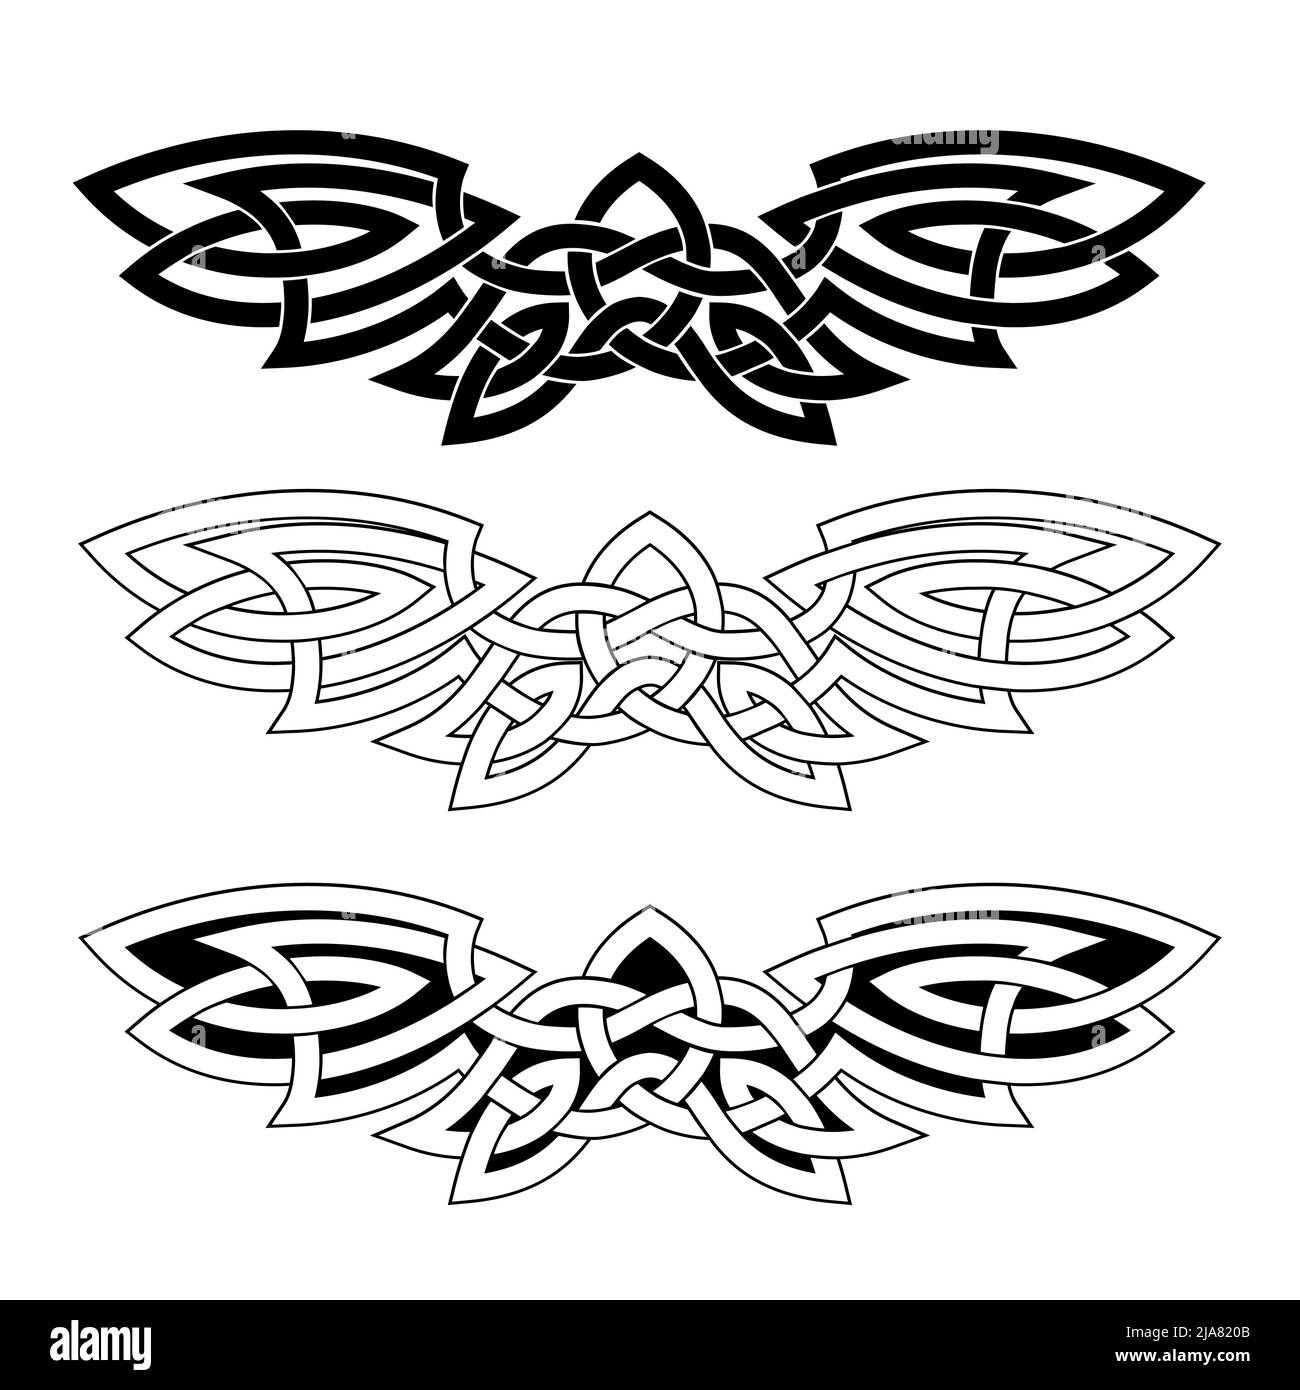 Ornament in the form of outstretched wings in the Celtic national style isolated on a white background. Stock Vector